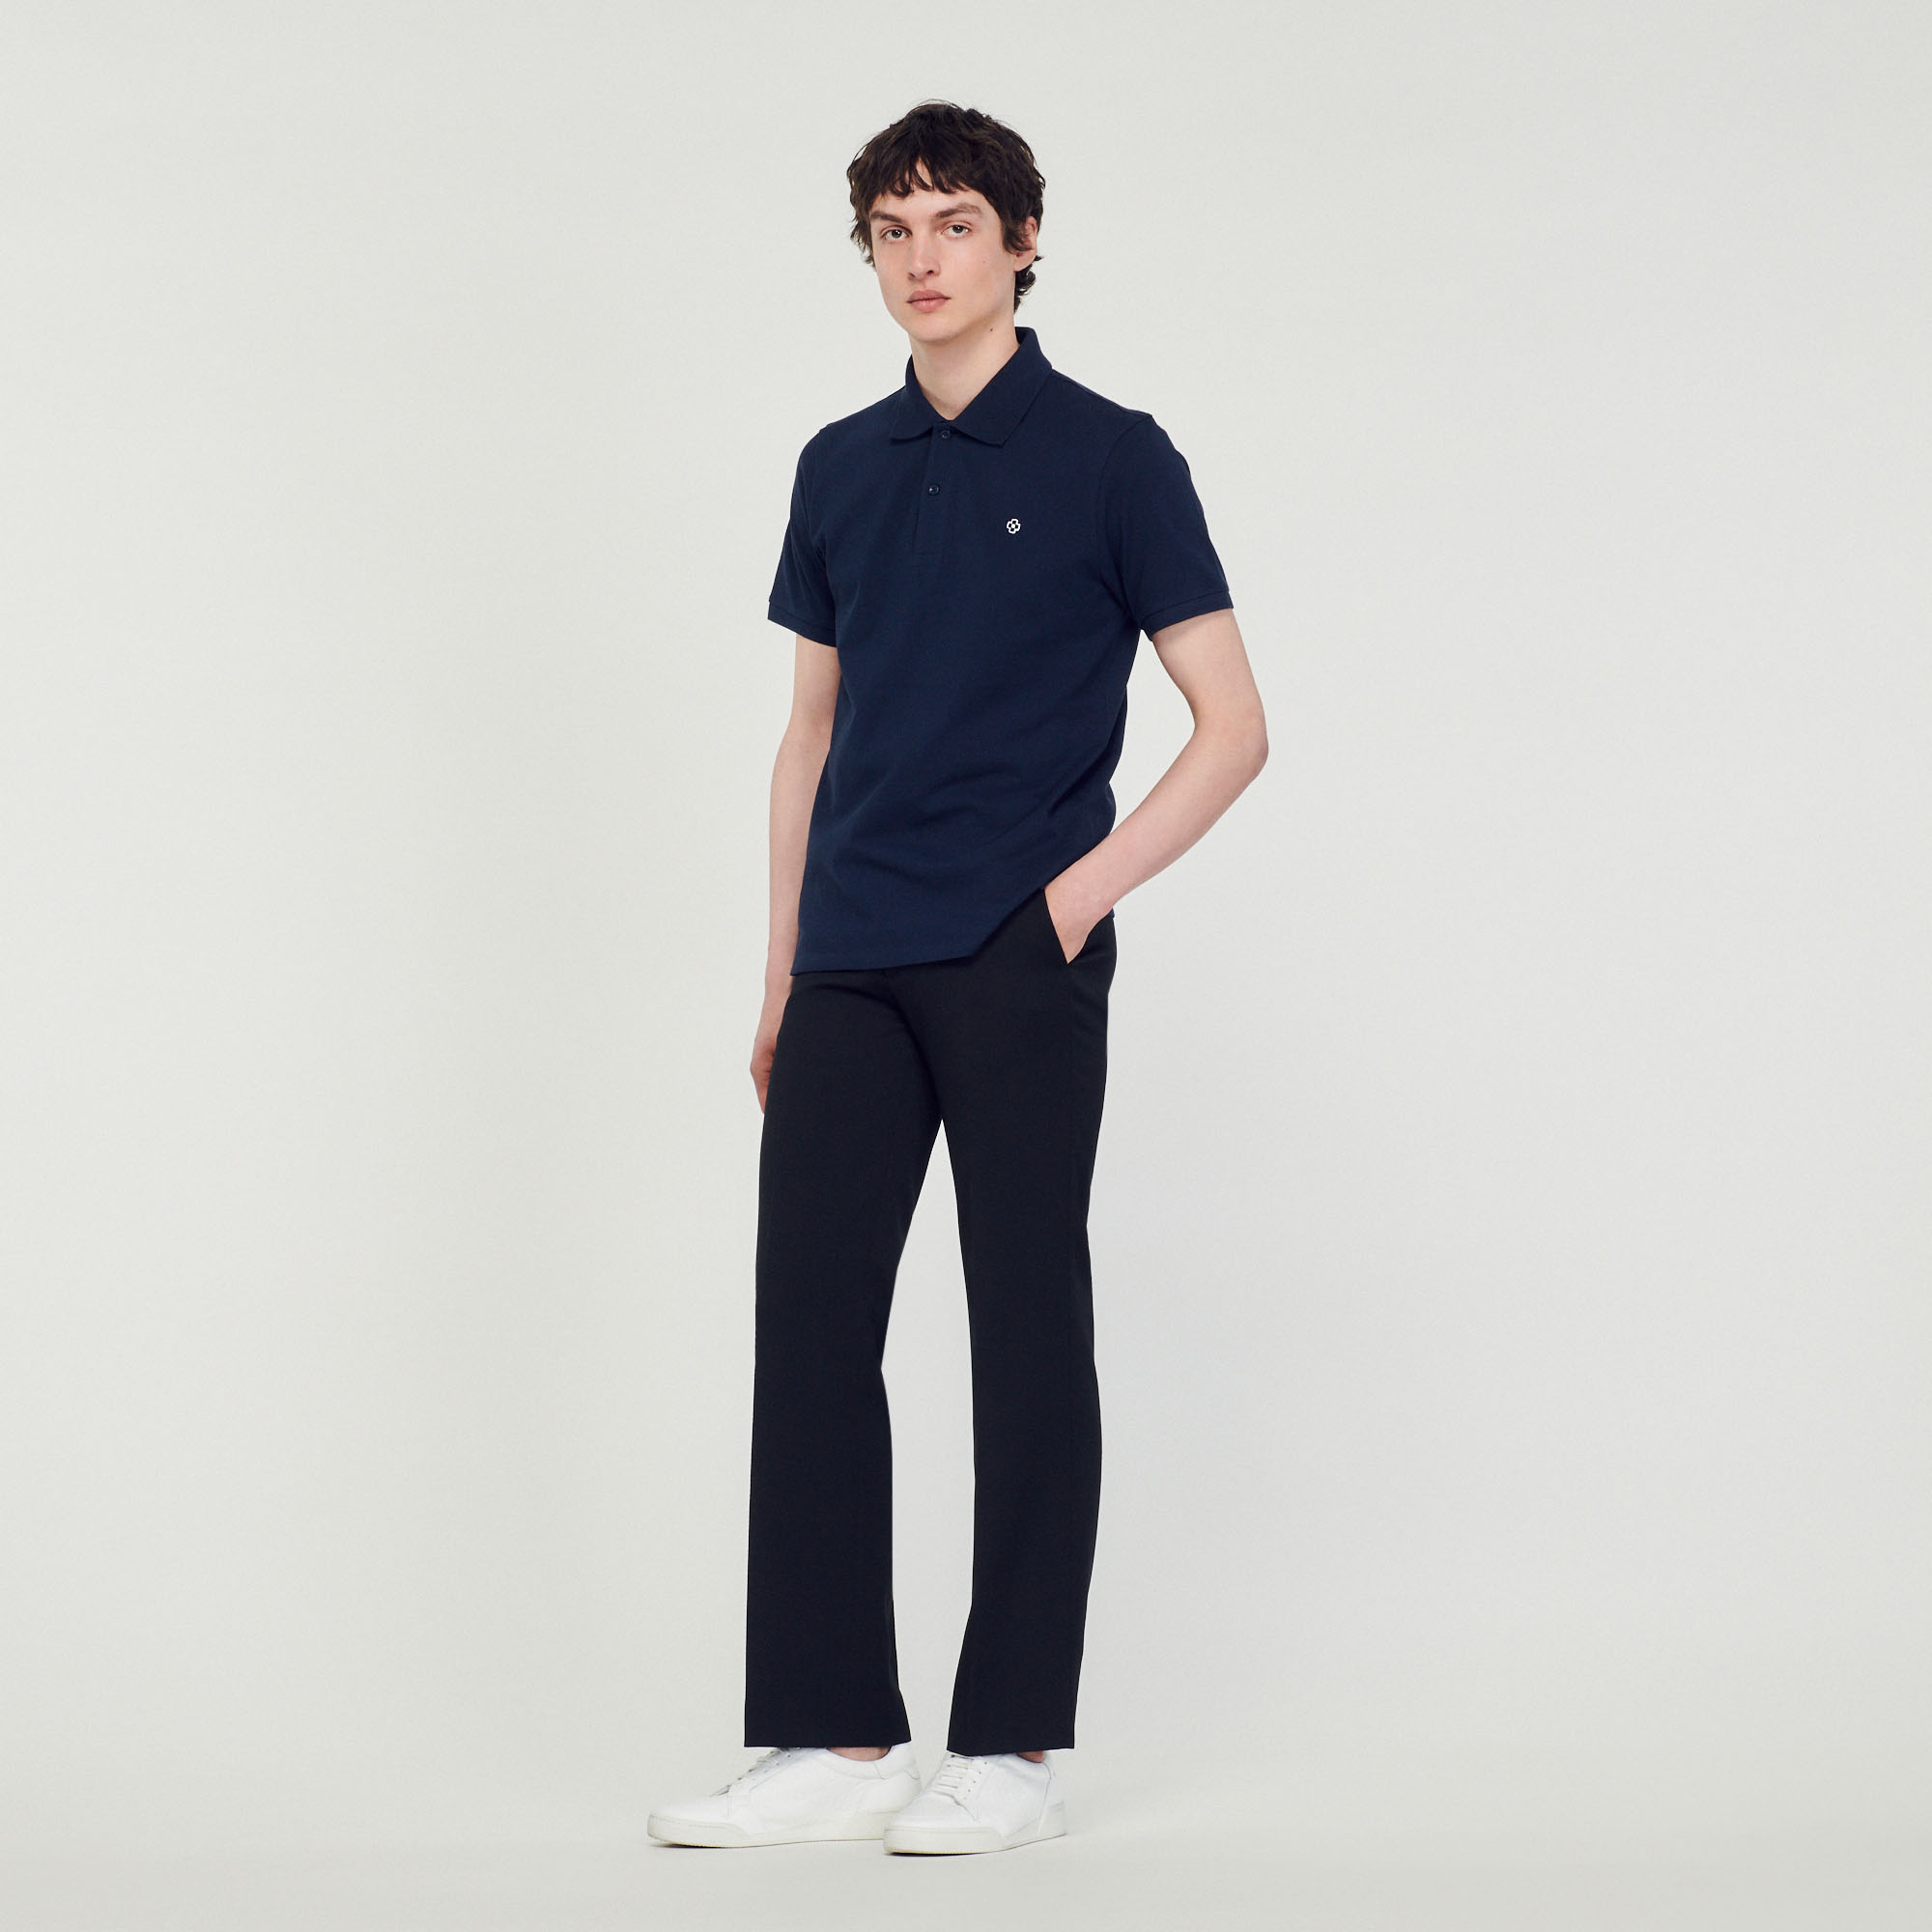 Sandro cotton Polo shirt with Square Cross patch